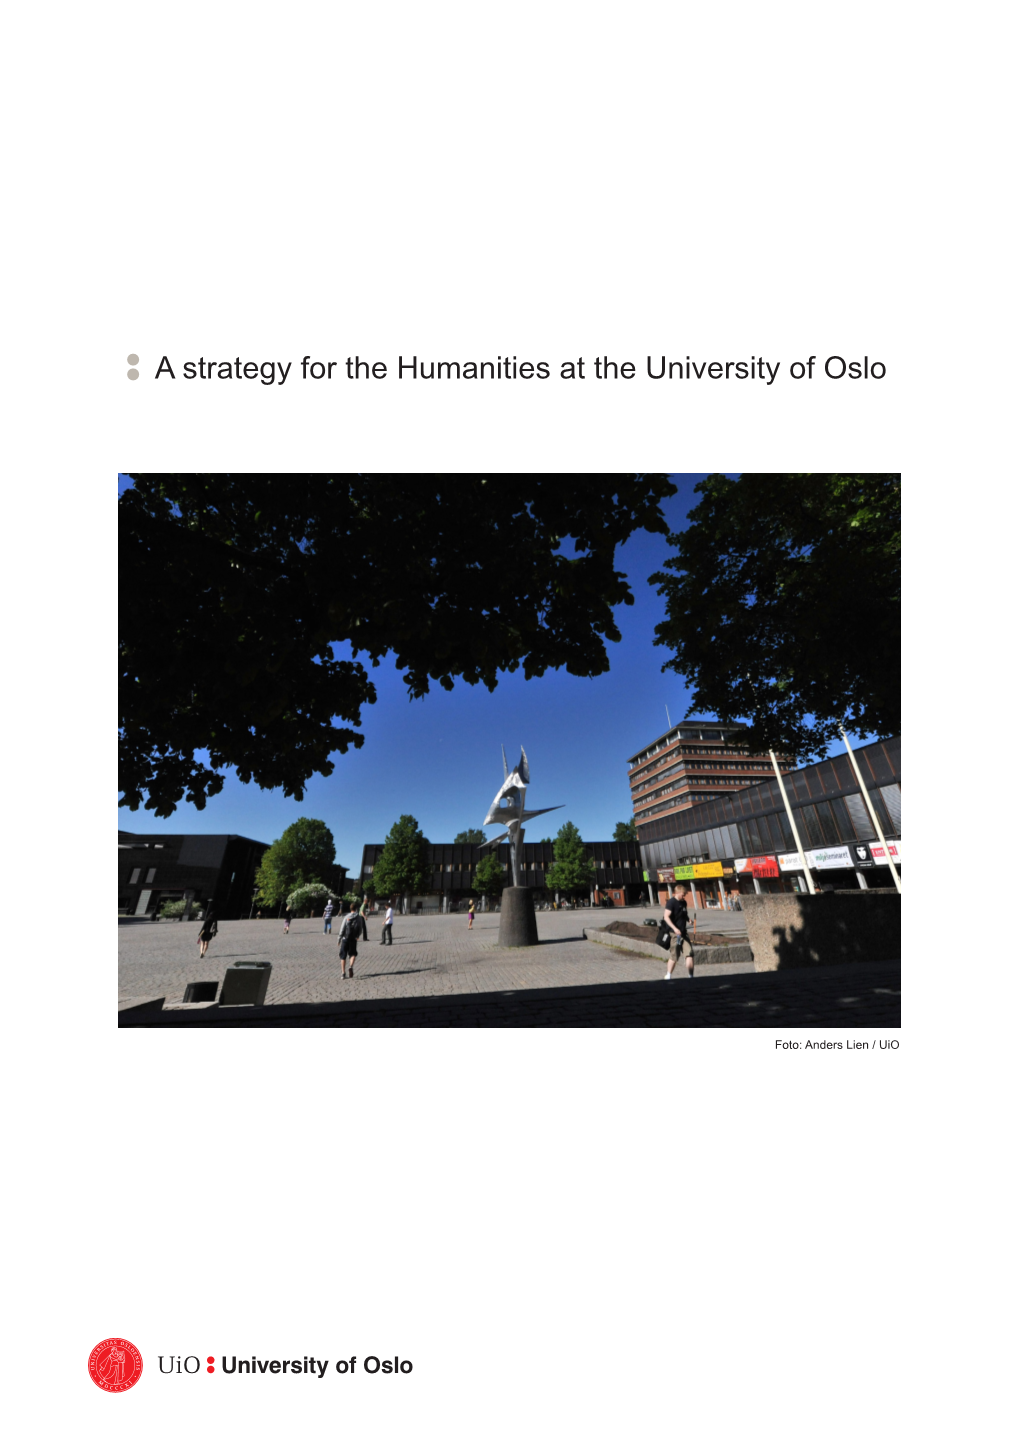 A Strategy for the Humanities at the University of Oslo (Pdf)